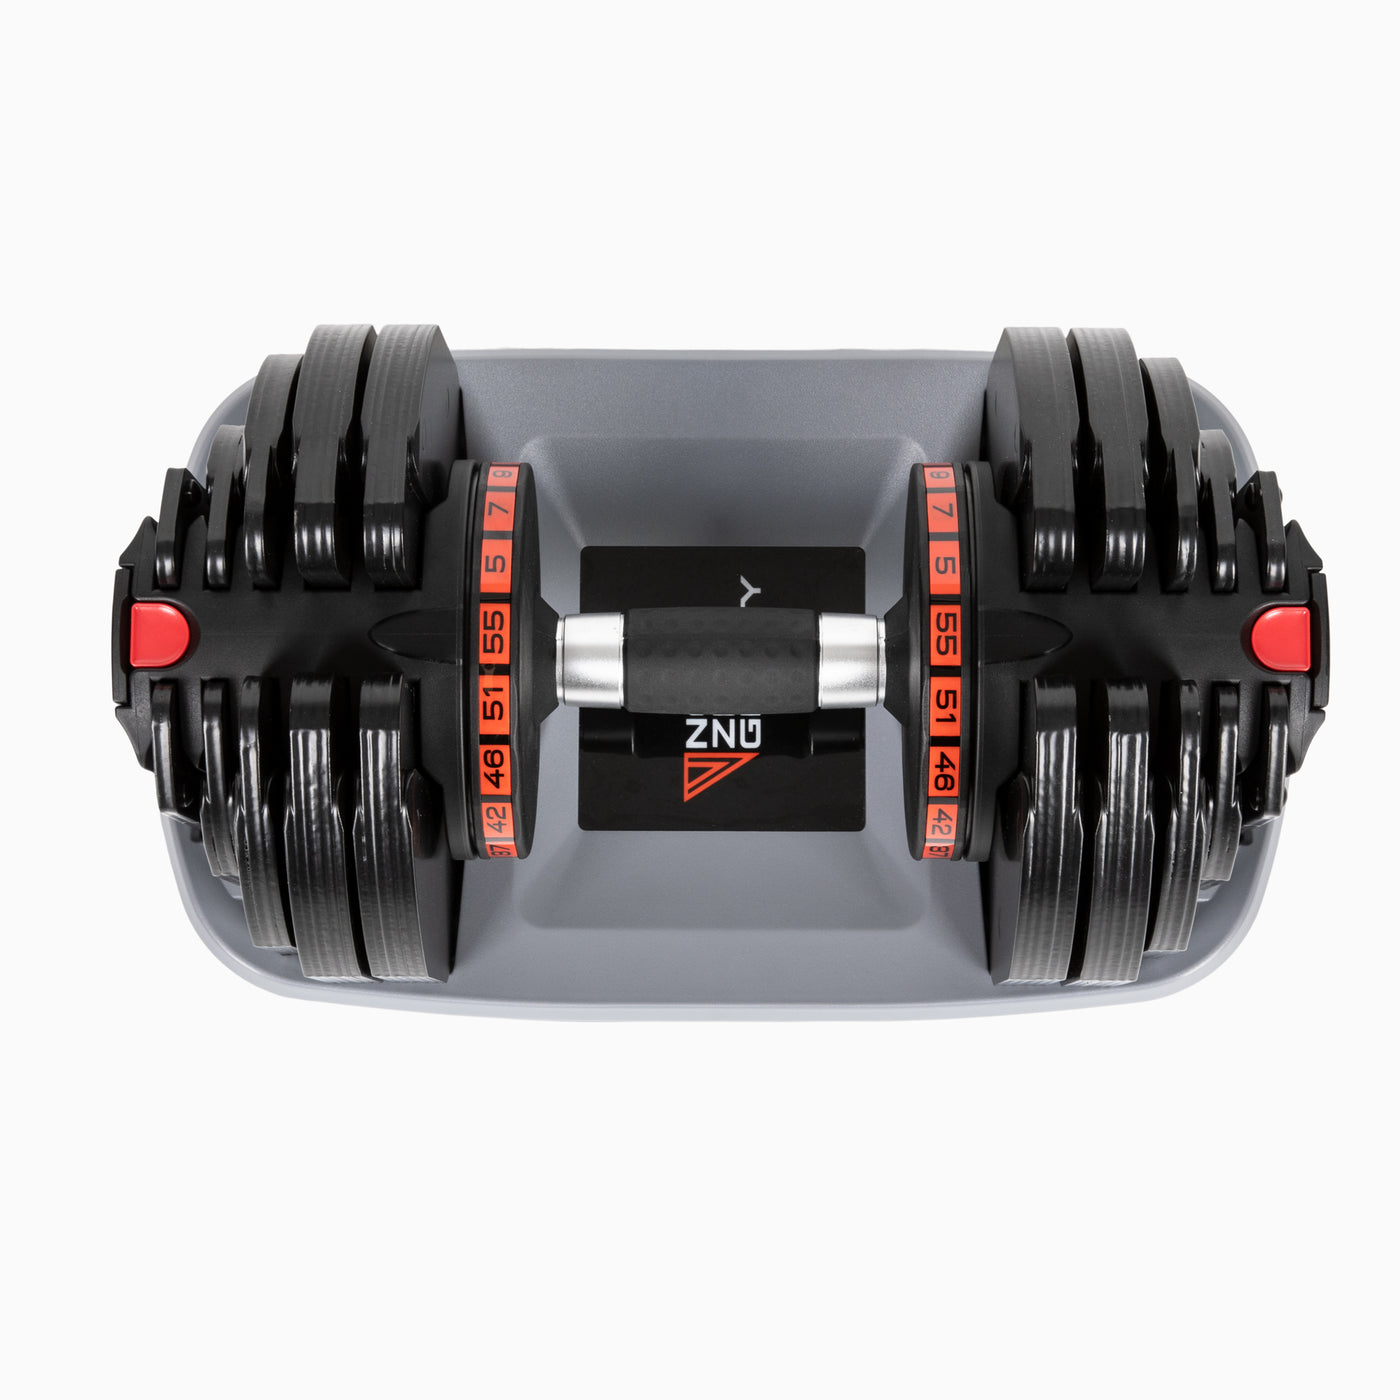 PowerDyne Adjustable Dumbbell Weight - Lift Up To 80lbs with At-Home Strength Training Equipment 